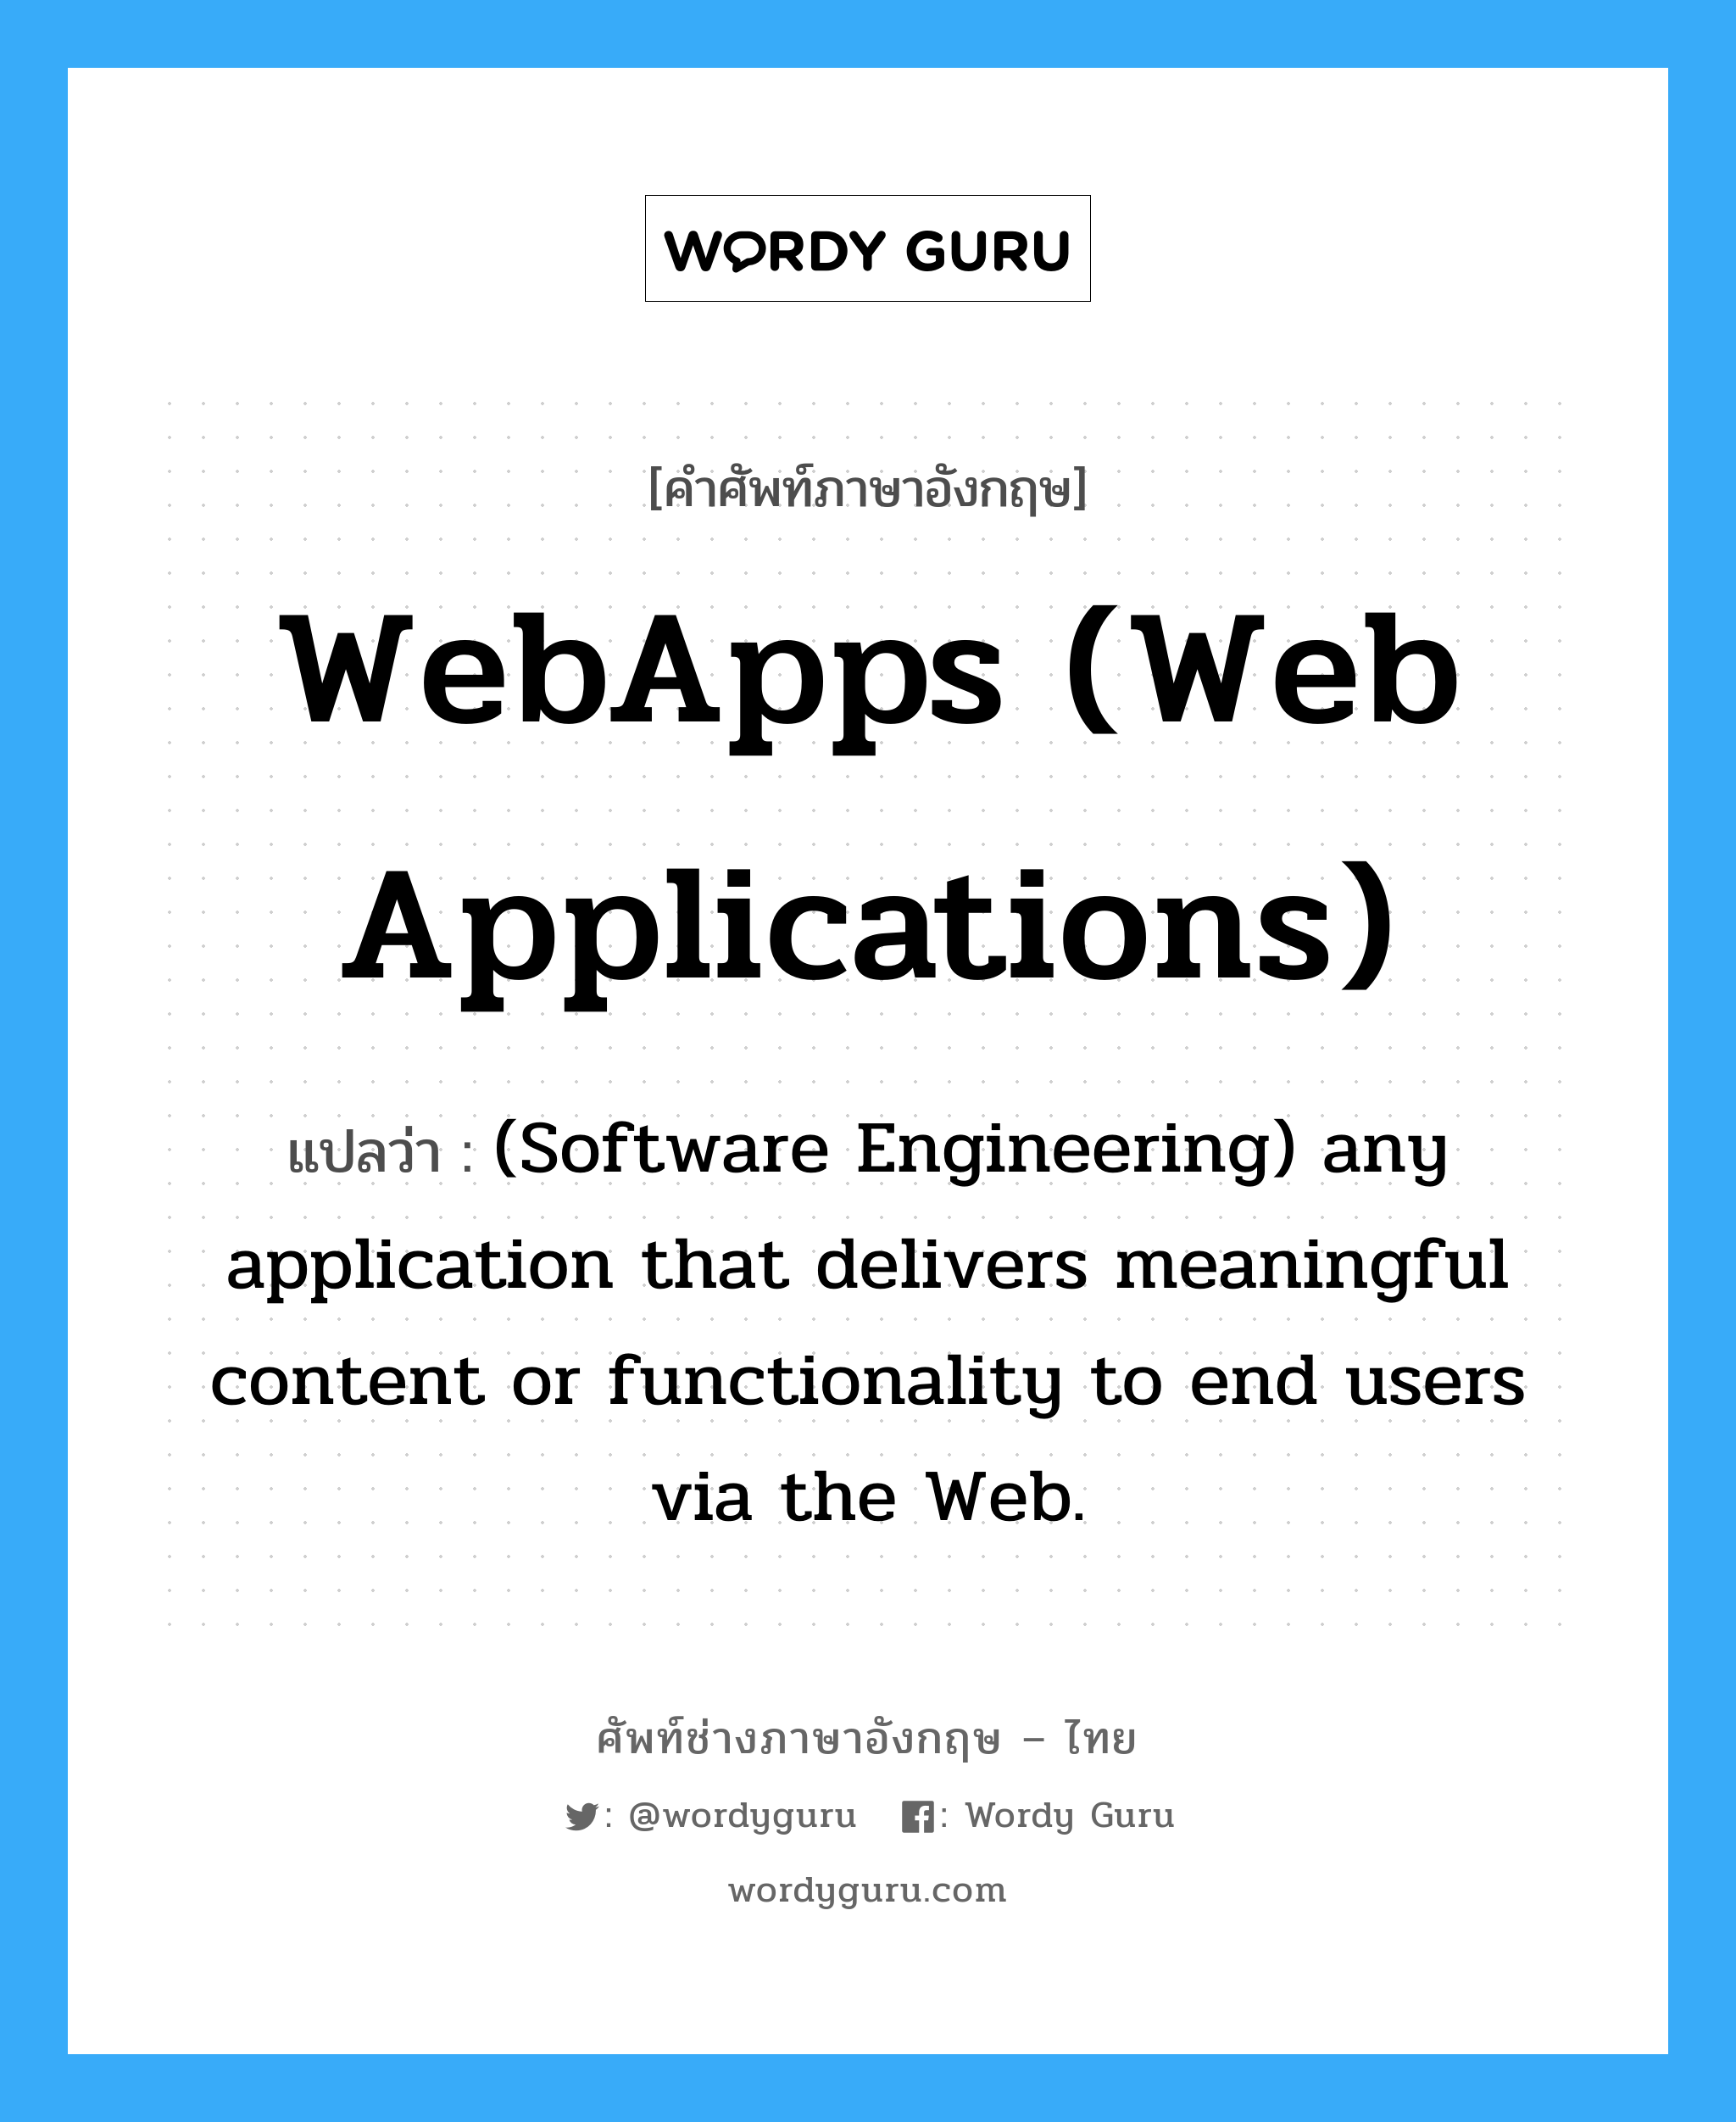 WebApps (Web Applications) แปลว่า?, คำศัพท์ช่างภาษาอังกฤษ - ไทย WebApps (Web Applications) คำศัพท์ภาษาอังกฤษ WebApps (Web Applications) แปลว่า (Software Engineering) any application that delivers meaningful content or functionality to end users via the Web.